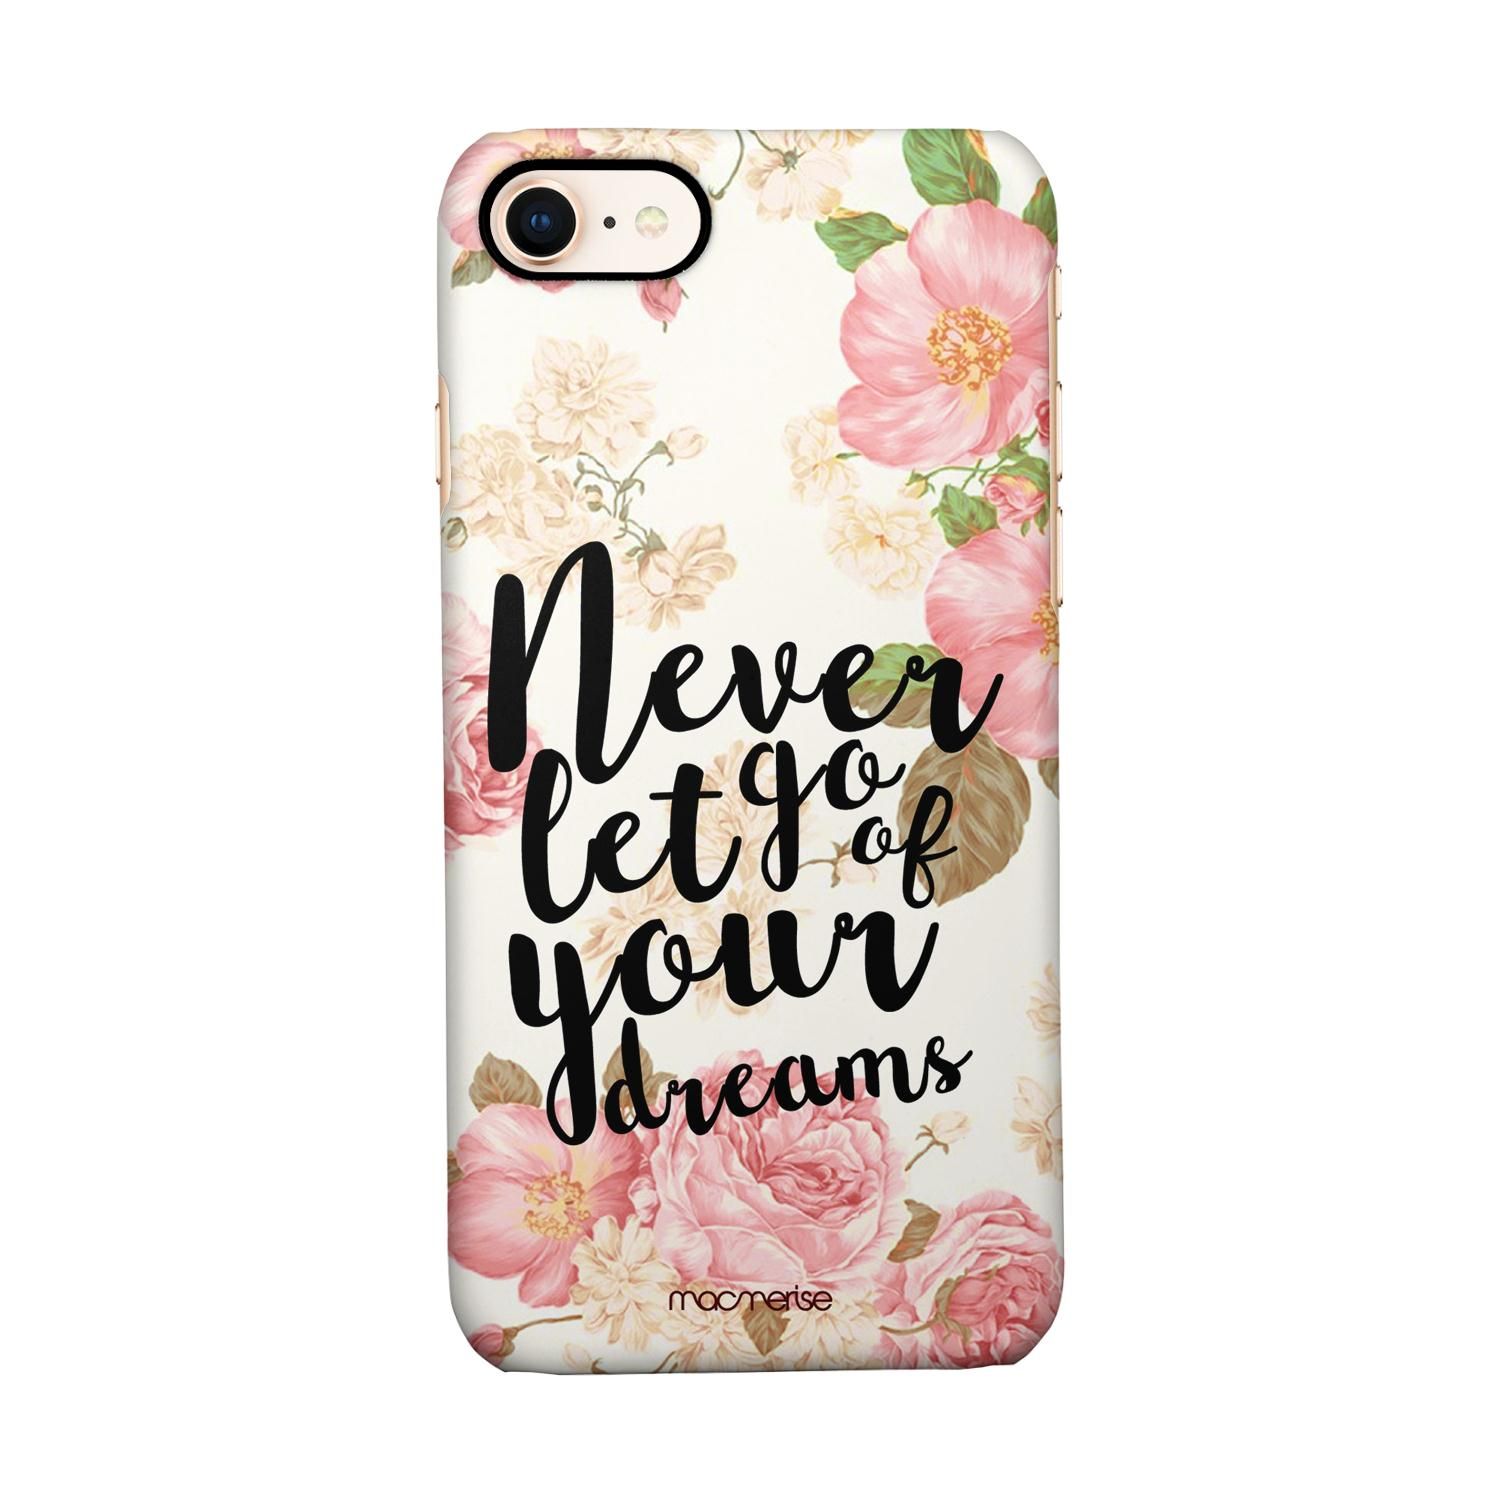 Buy Your Dreams - Sleek Phone Case for iPhone 8 Online